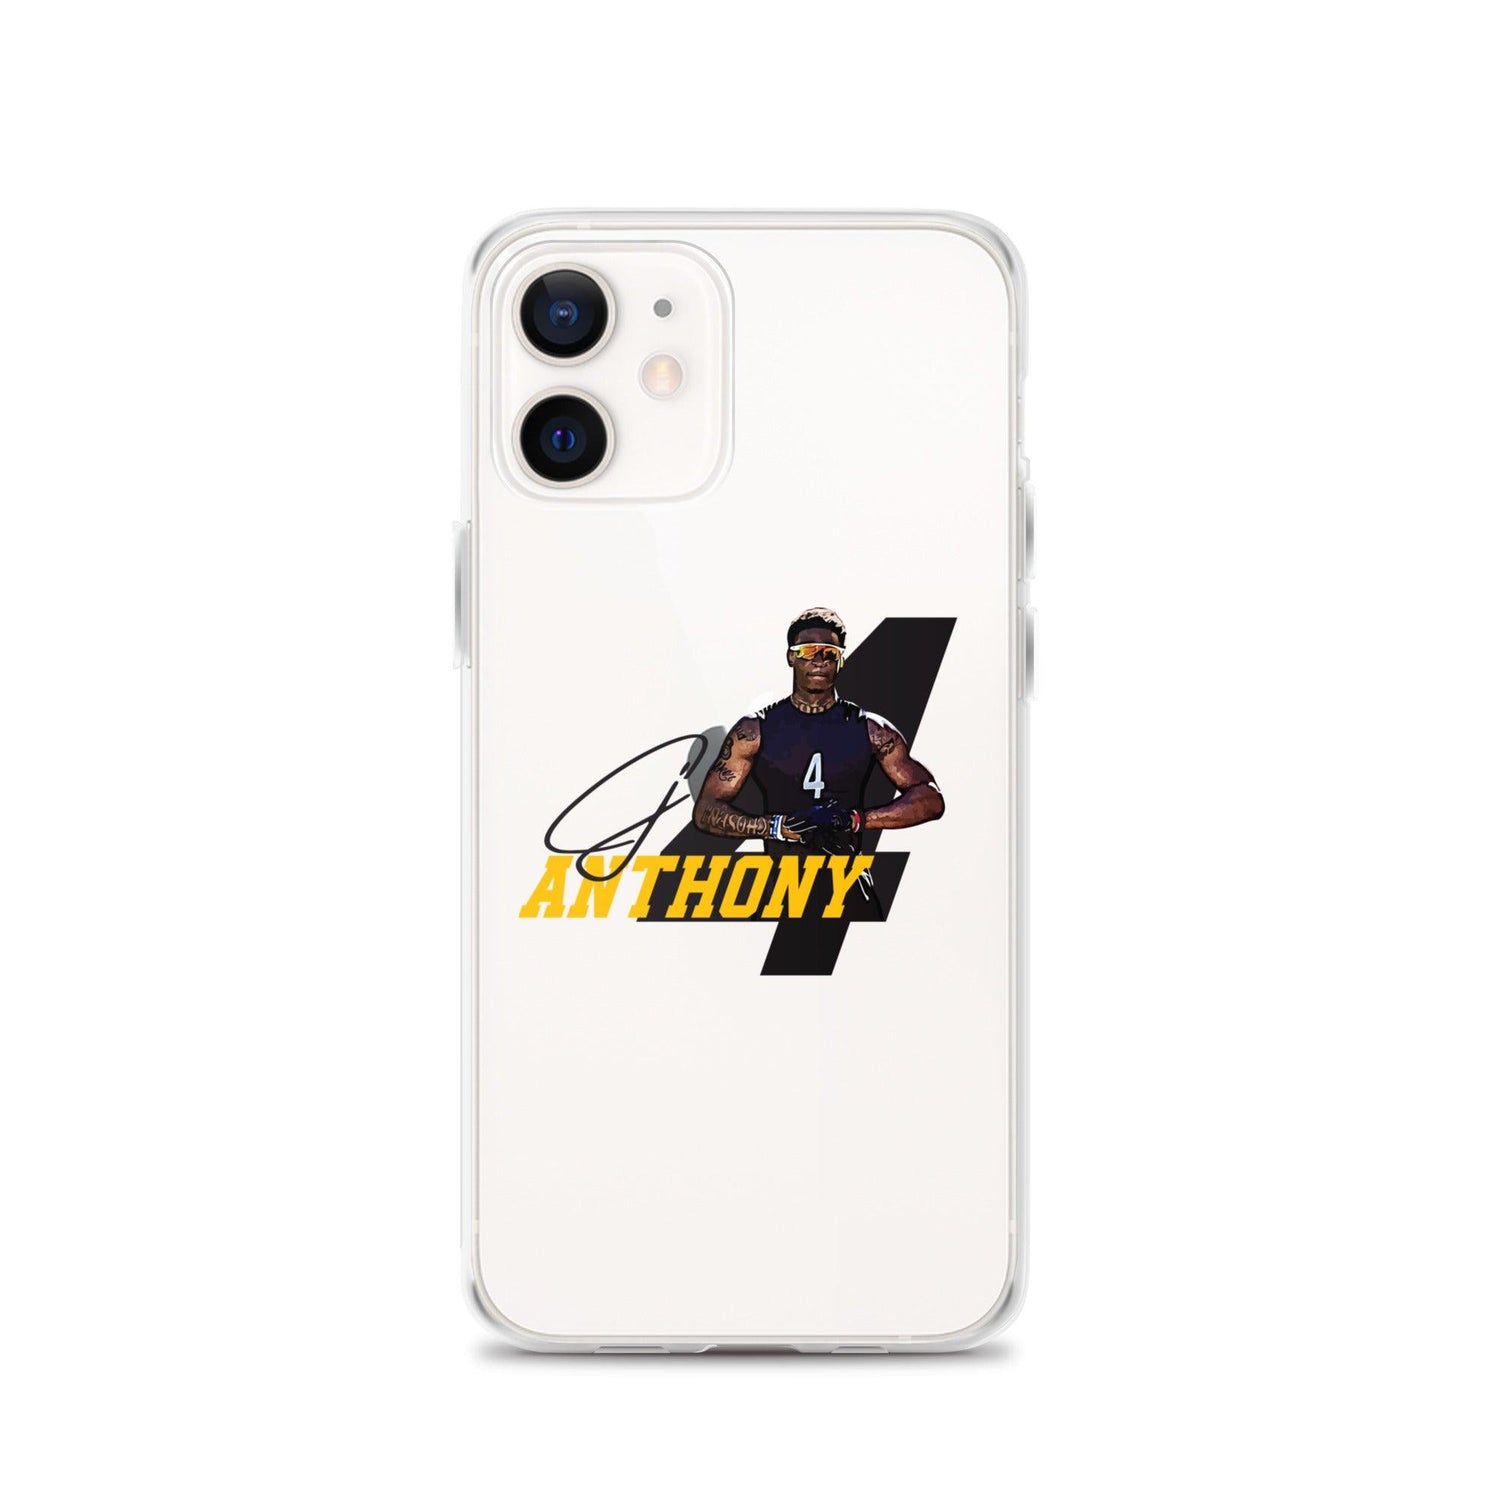 CJ Anthony "Gameday" iPhone Case - Fan Arch